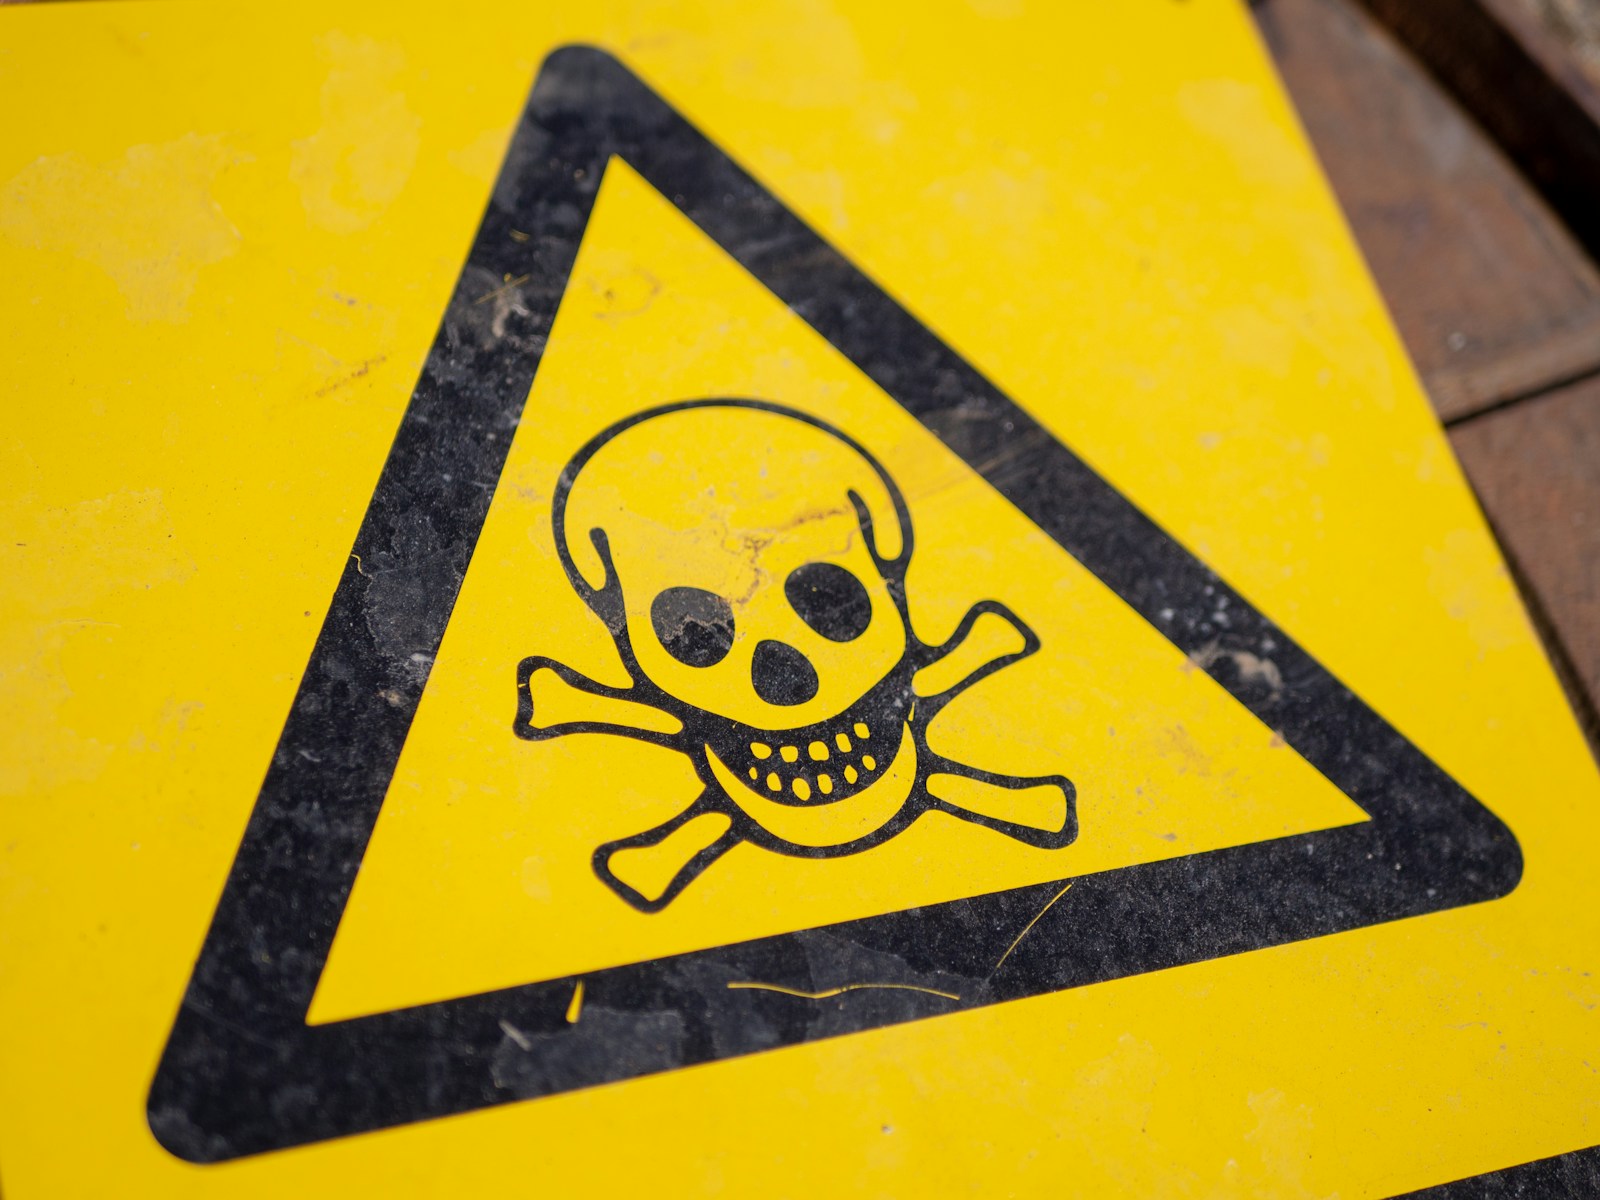 How to Watch Out for Poisons in Your Home - Tips from your local Cloverdale Real Estate Specialists